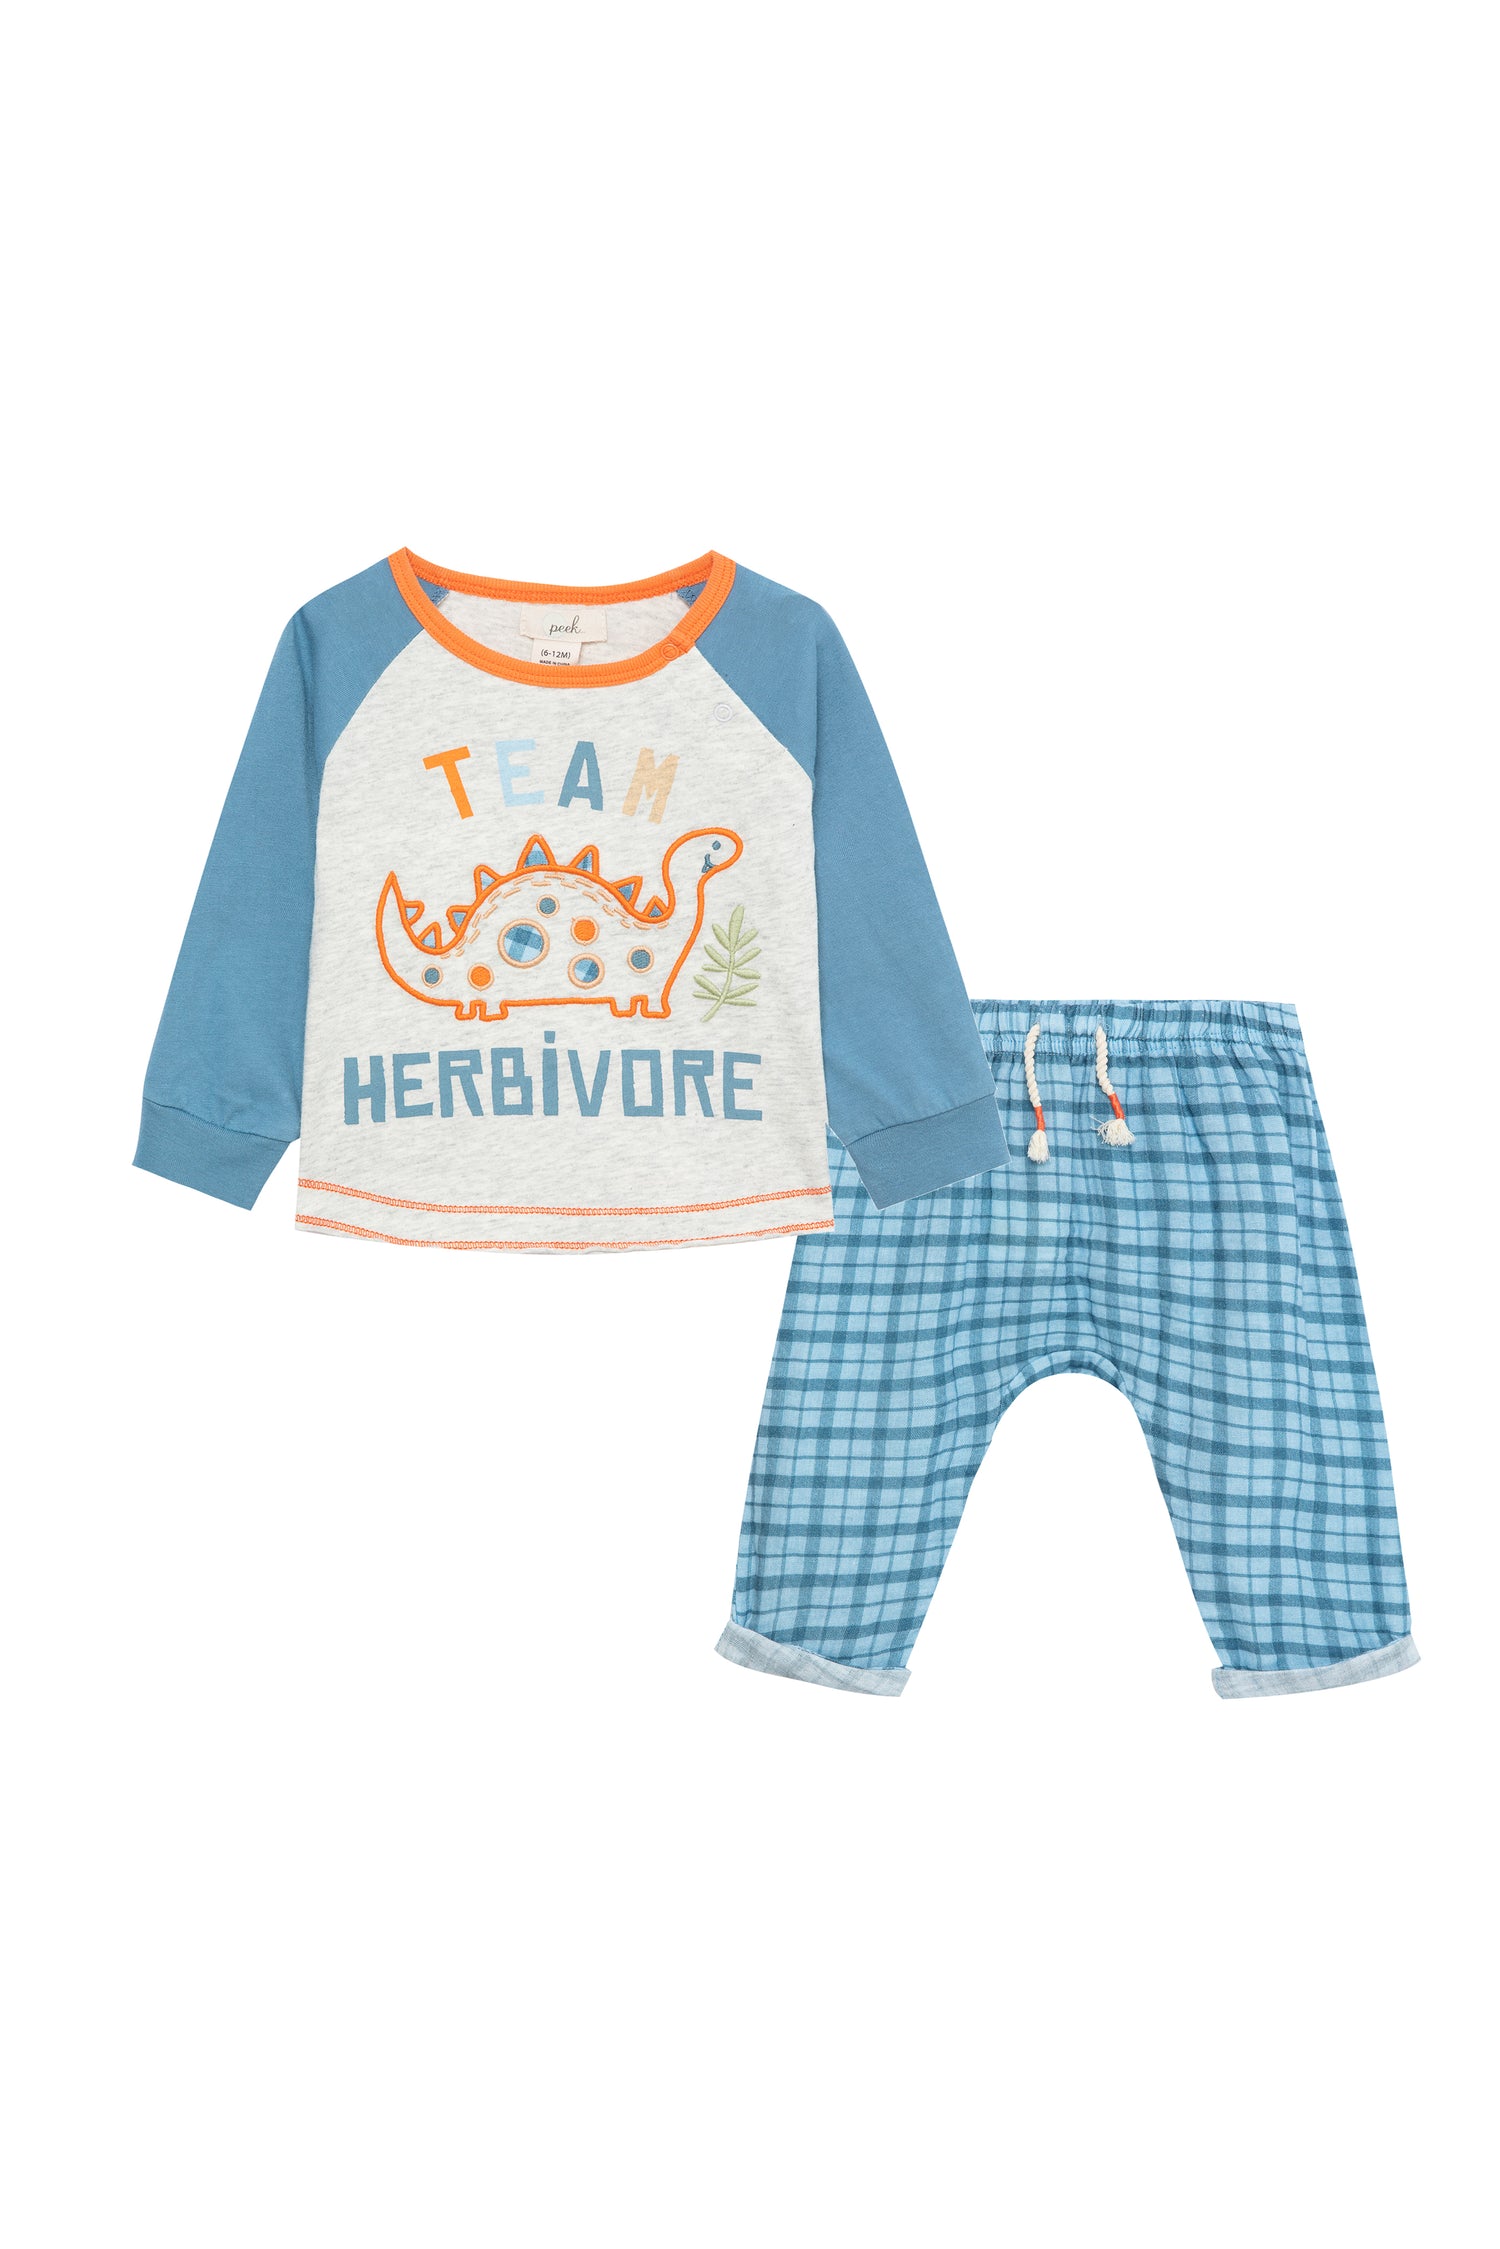 TWO PIECE SET FEATURING AN APPLIQUE DINOSAUR AND "TEAM HERBIVORE" VERBIAGE.